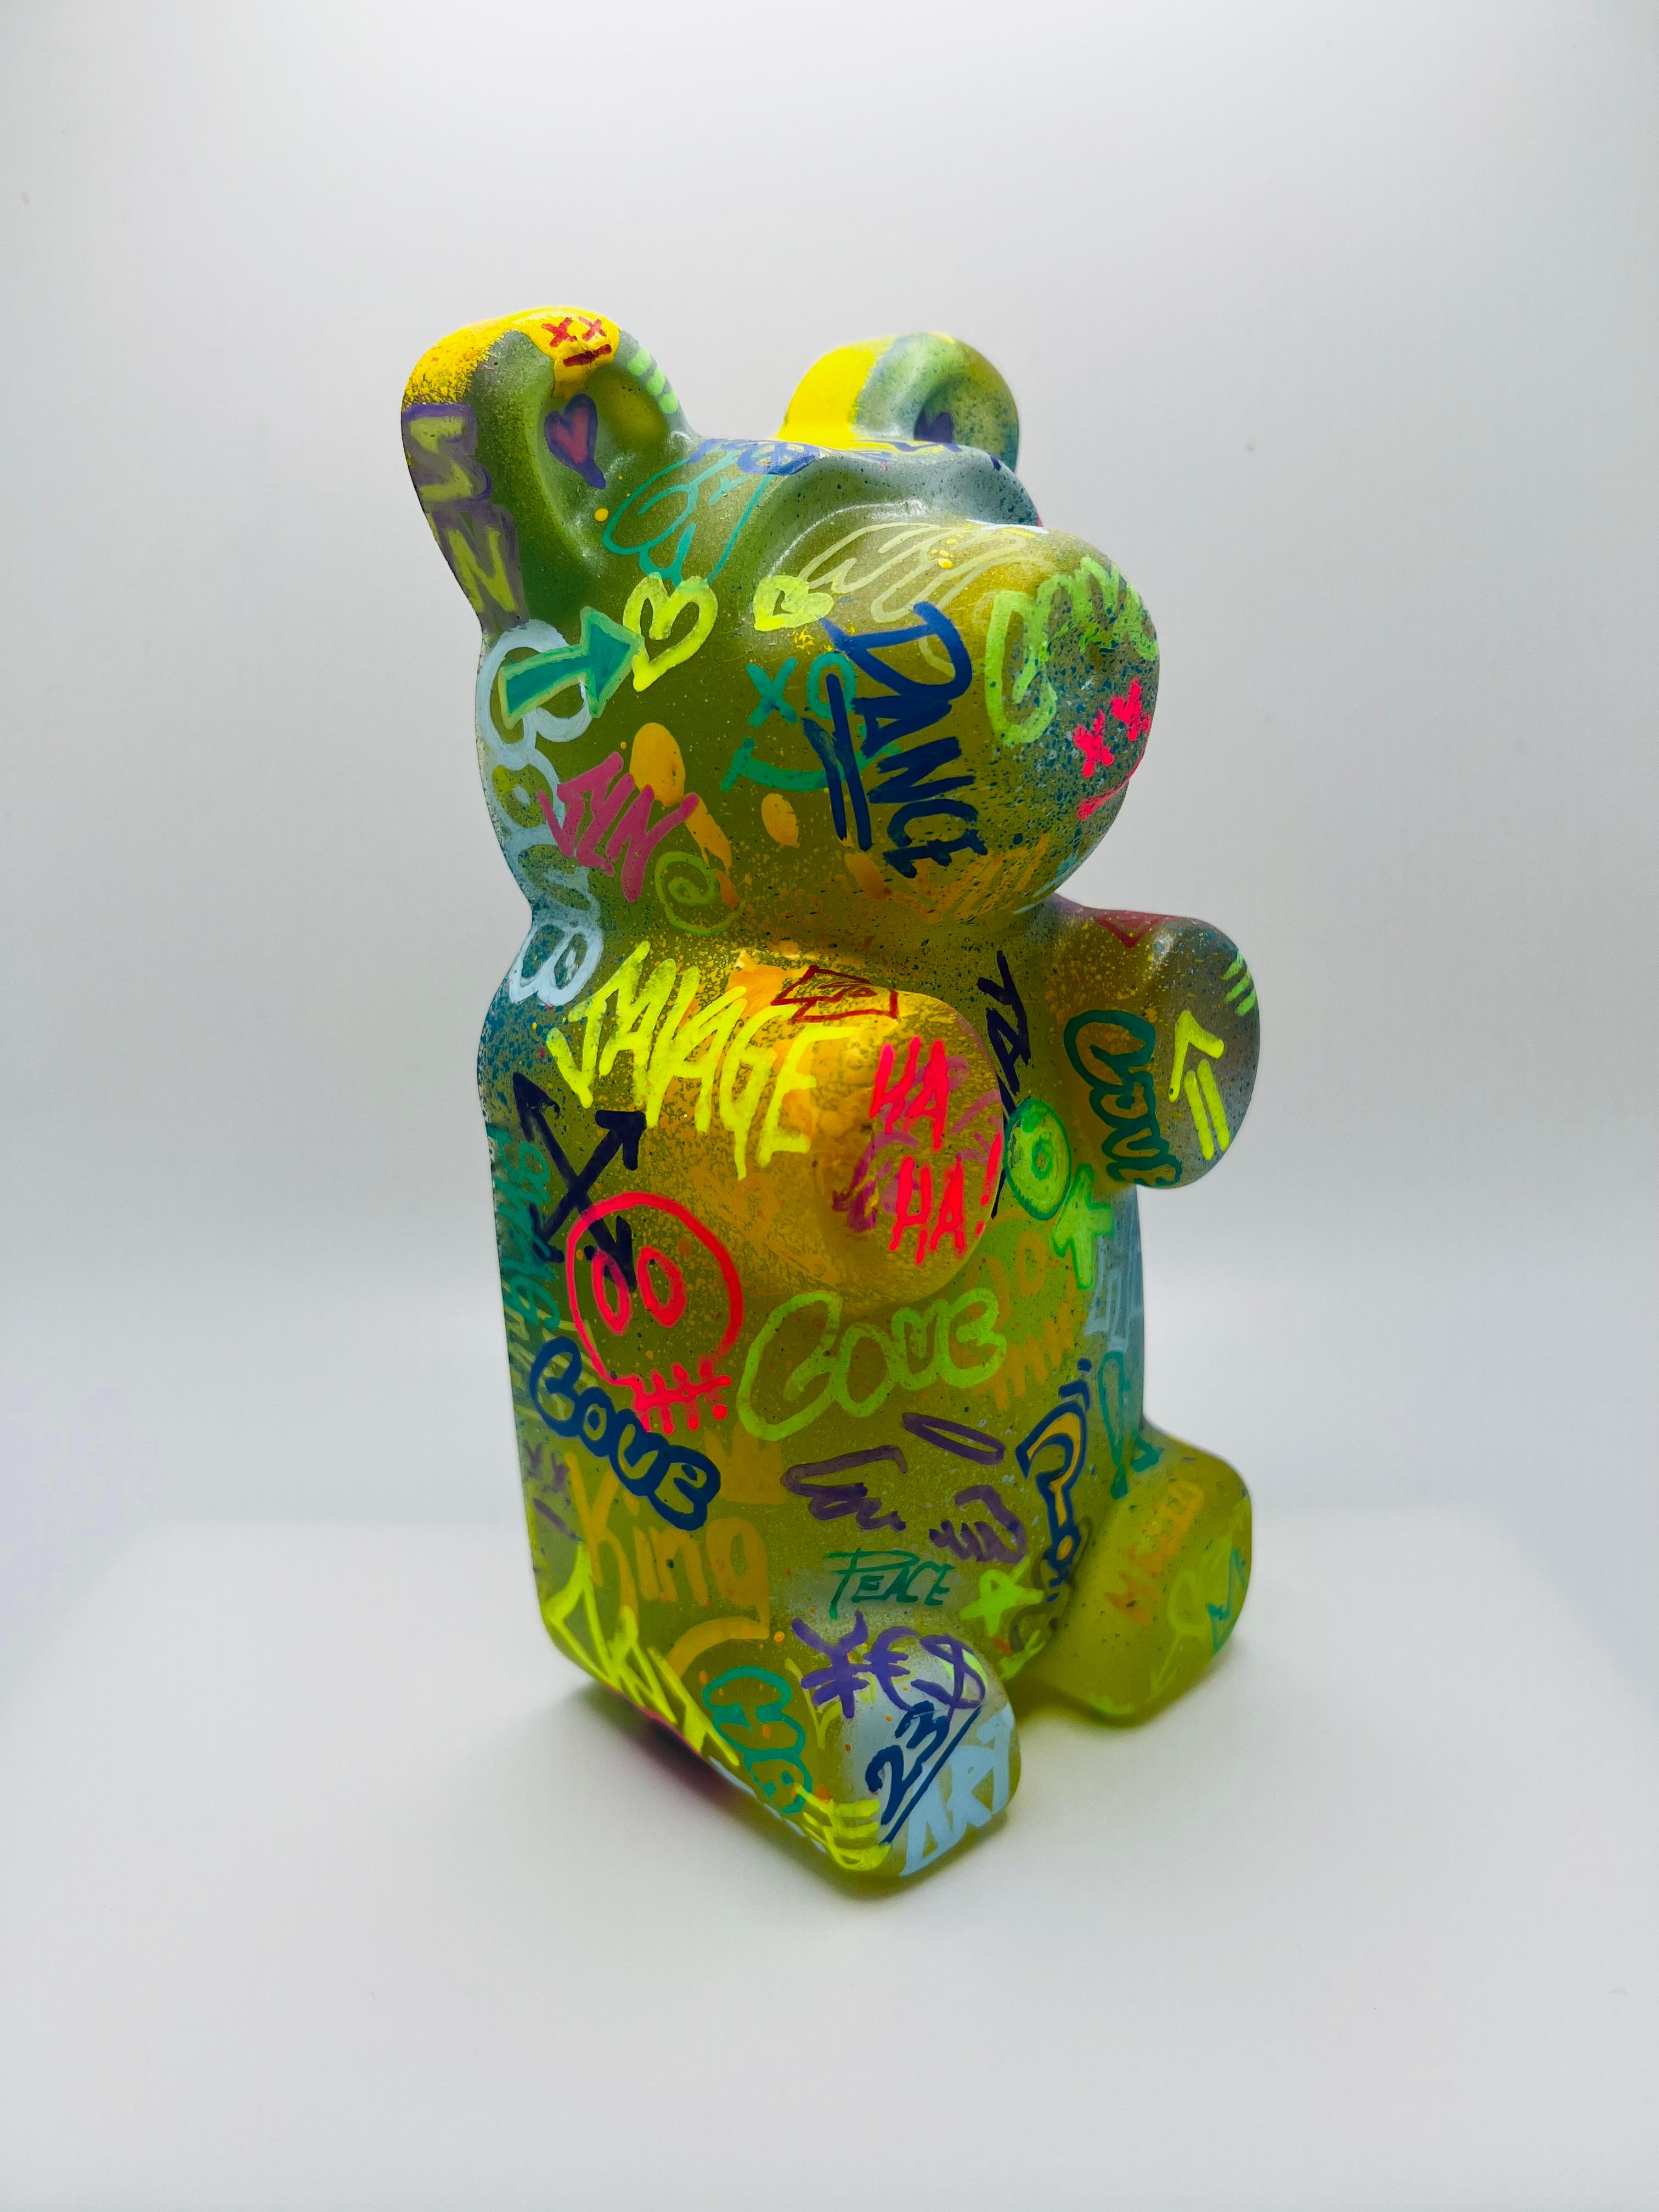 hand made resin gummy bear Approx 7.5 inch height x 3.5 inch wide x 2.5 inch depth 
Resin, painted by hand
Signed  -  Each unique piece designed by LA artist Sahara Novotna